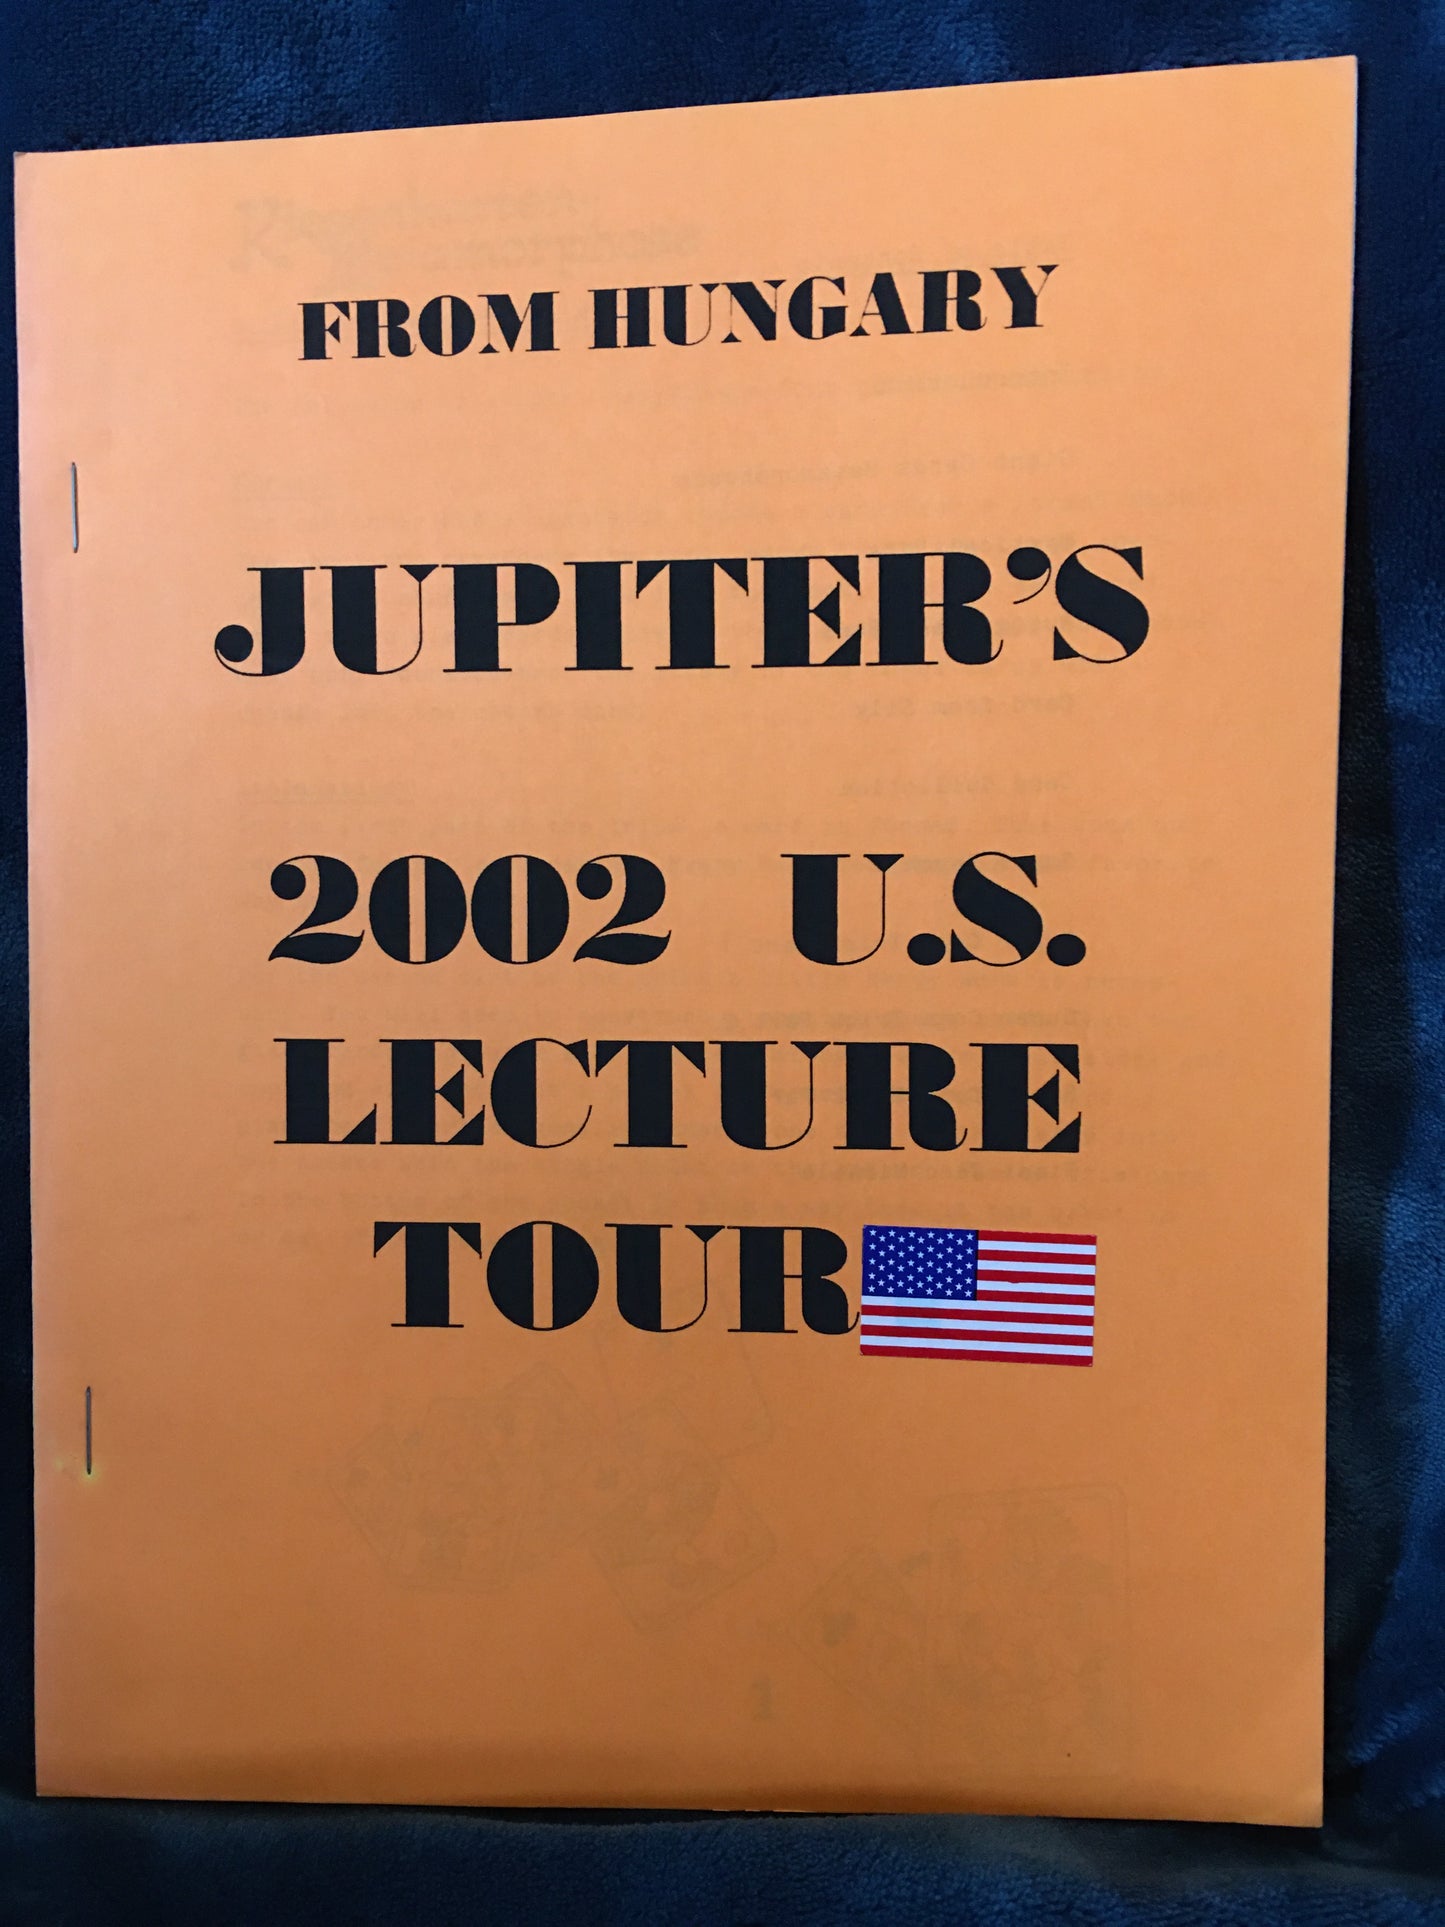 Jupiter's 2002 US Lecture Tour Notes